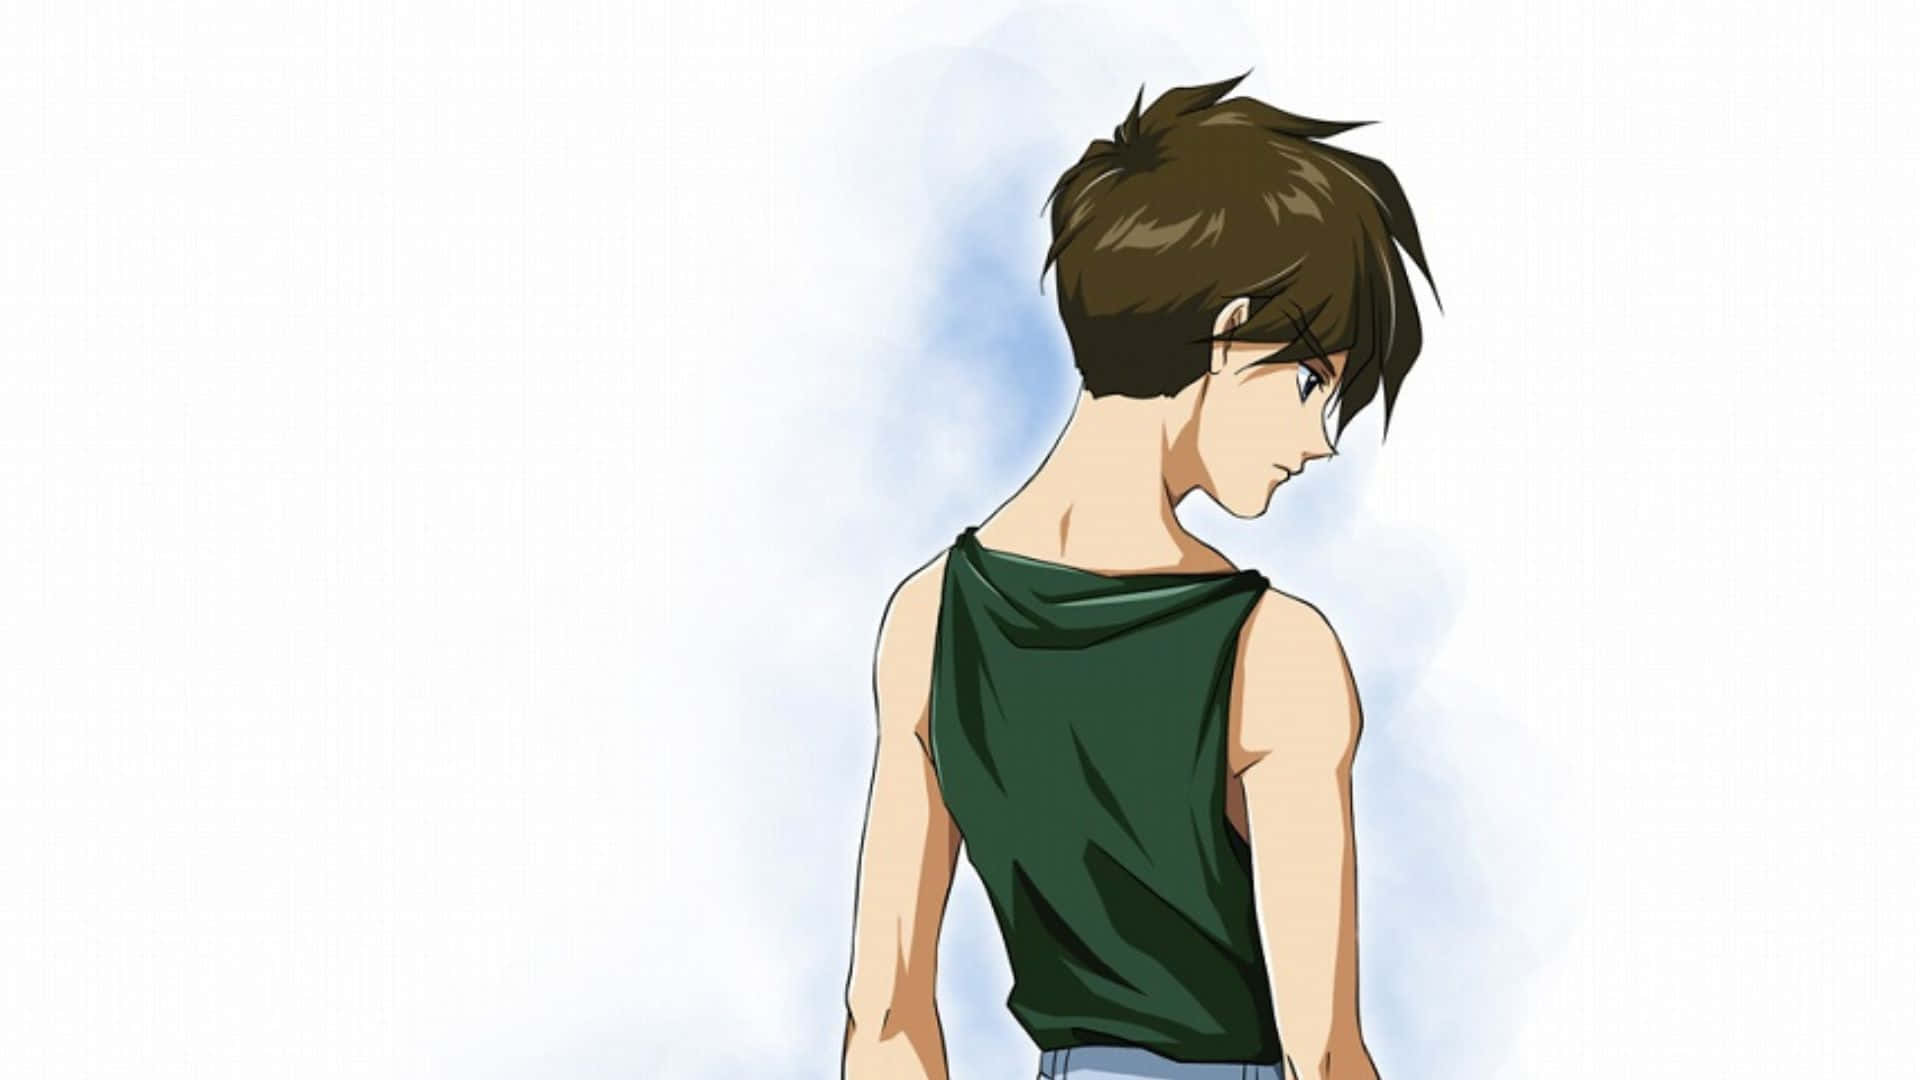 Heero Yuy of Gundam Wing poised for action Wallpaper